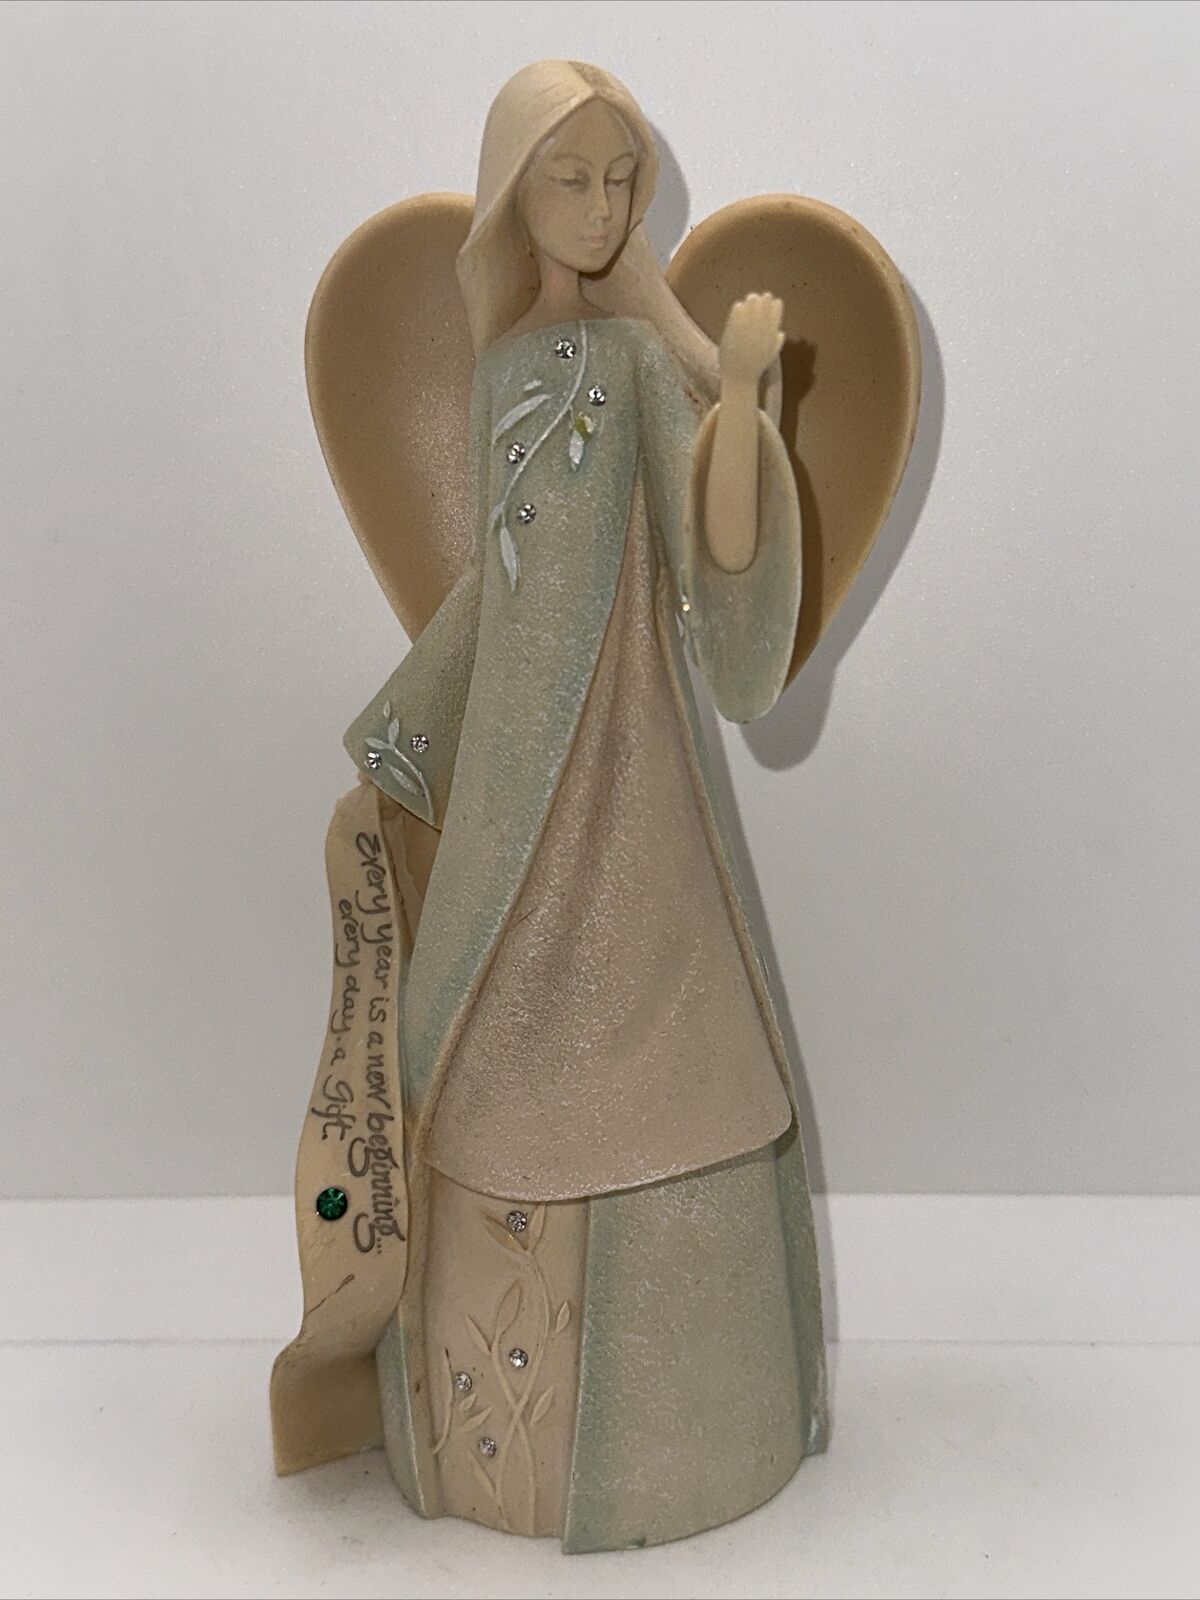 Foundations Monthly Birthstone Angels May Angel Figurine New